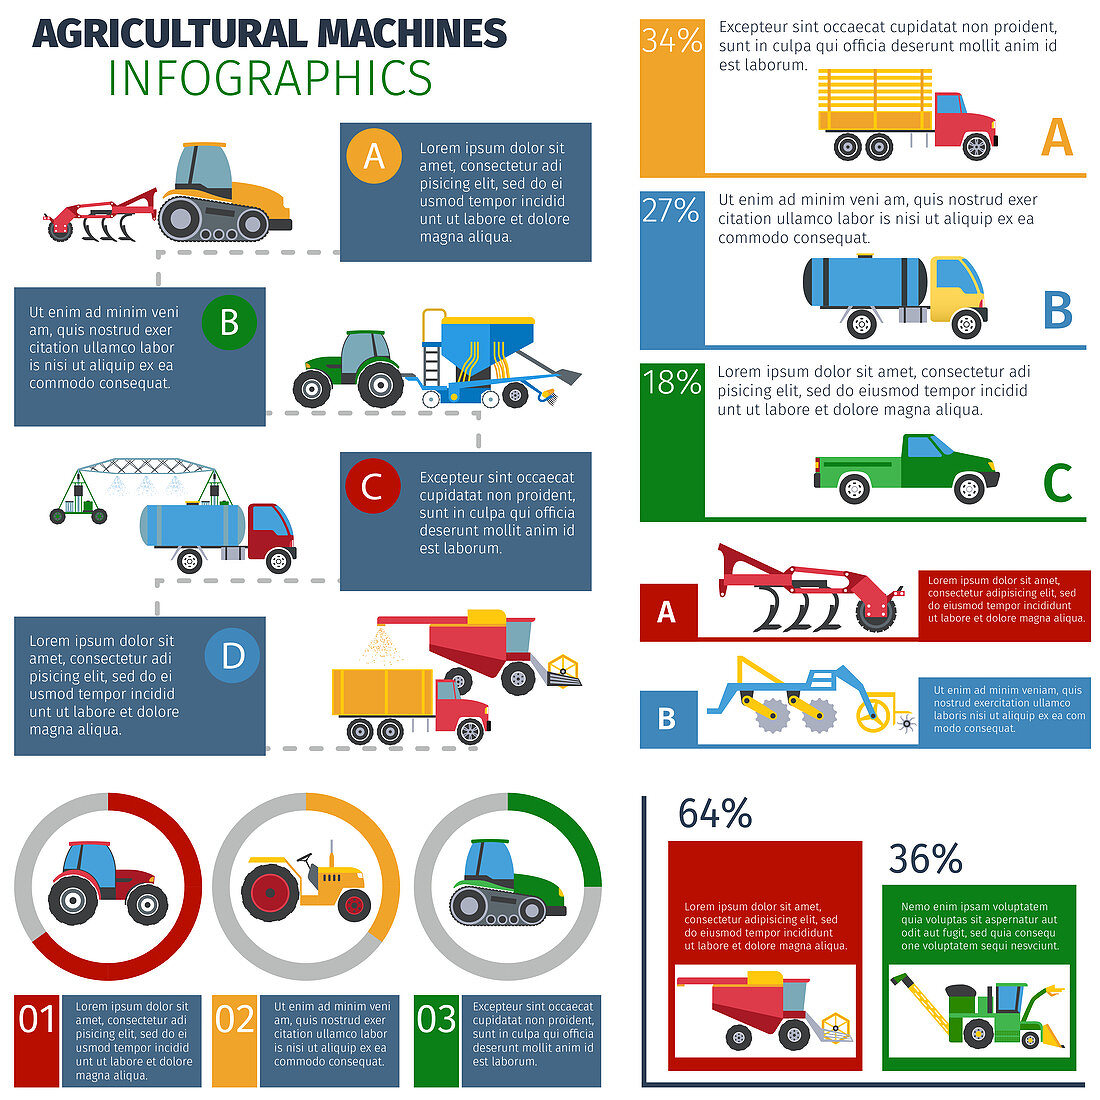 Agricultural machines, illustration